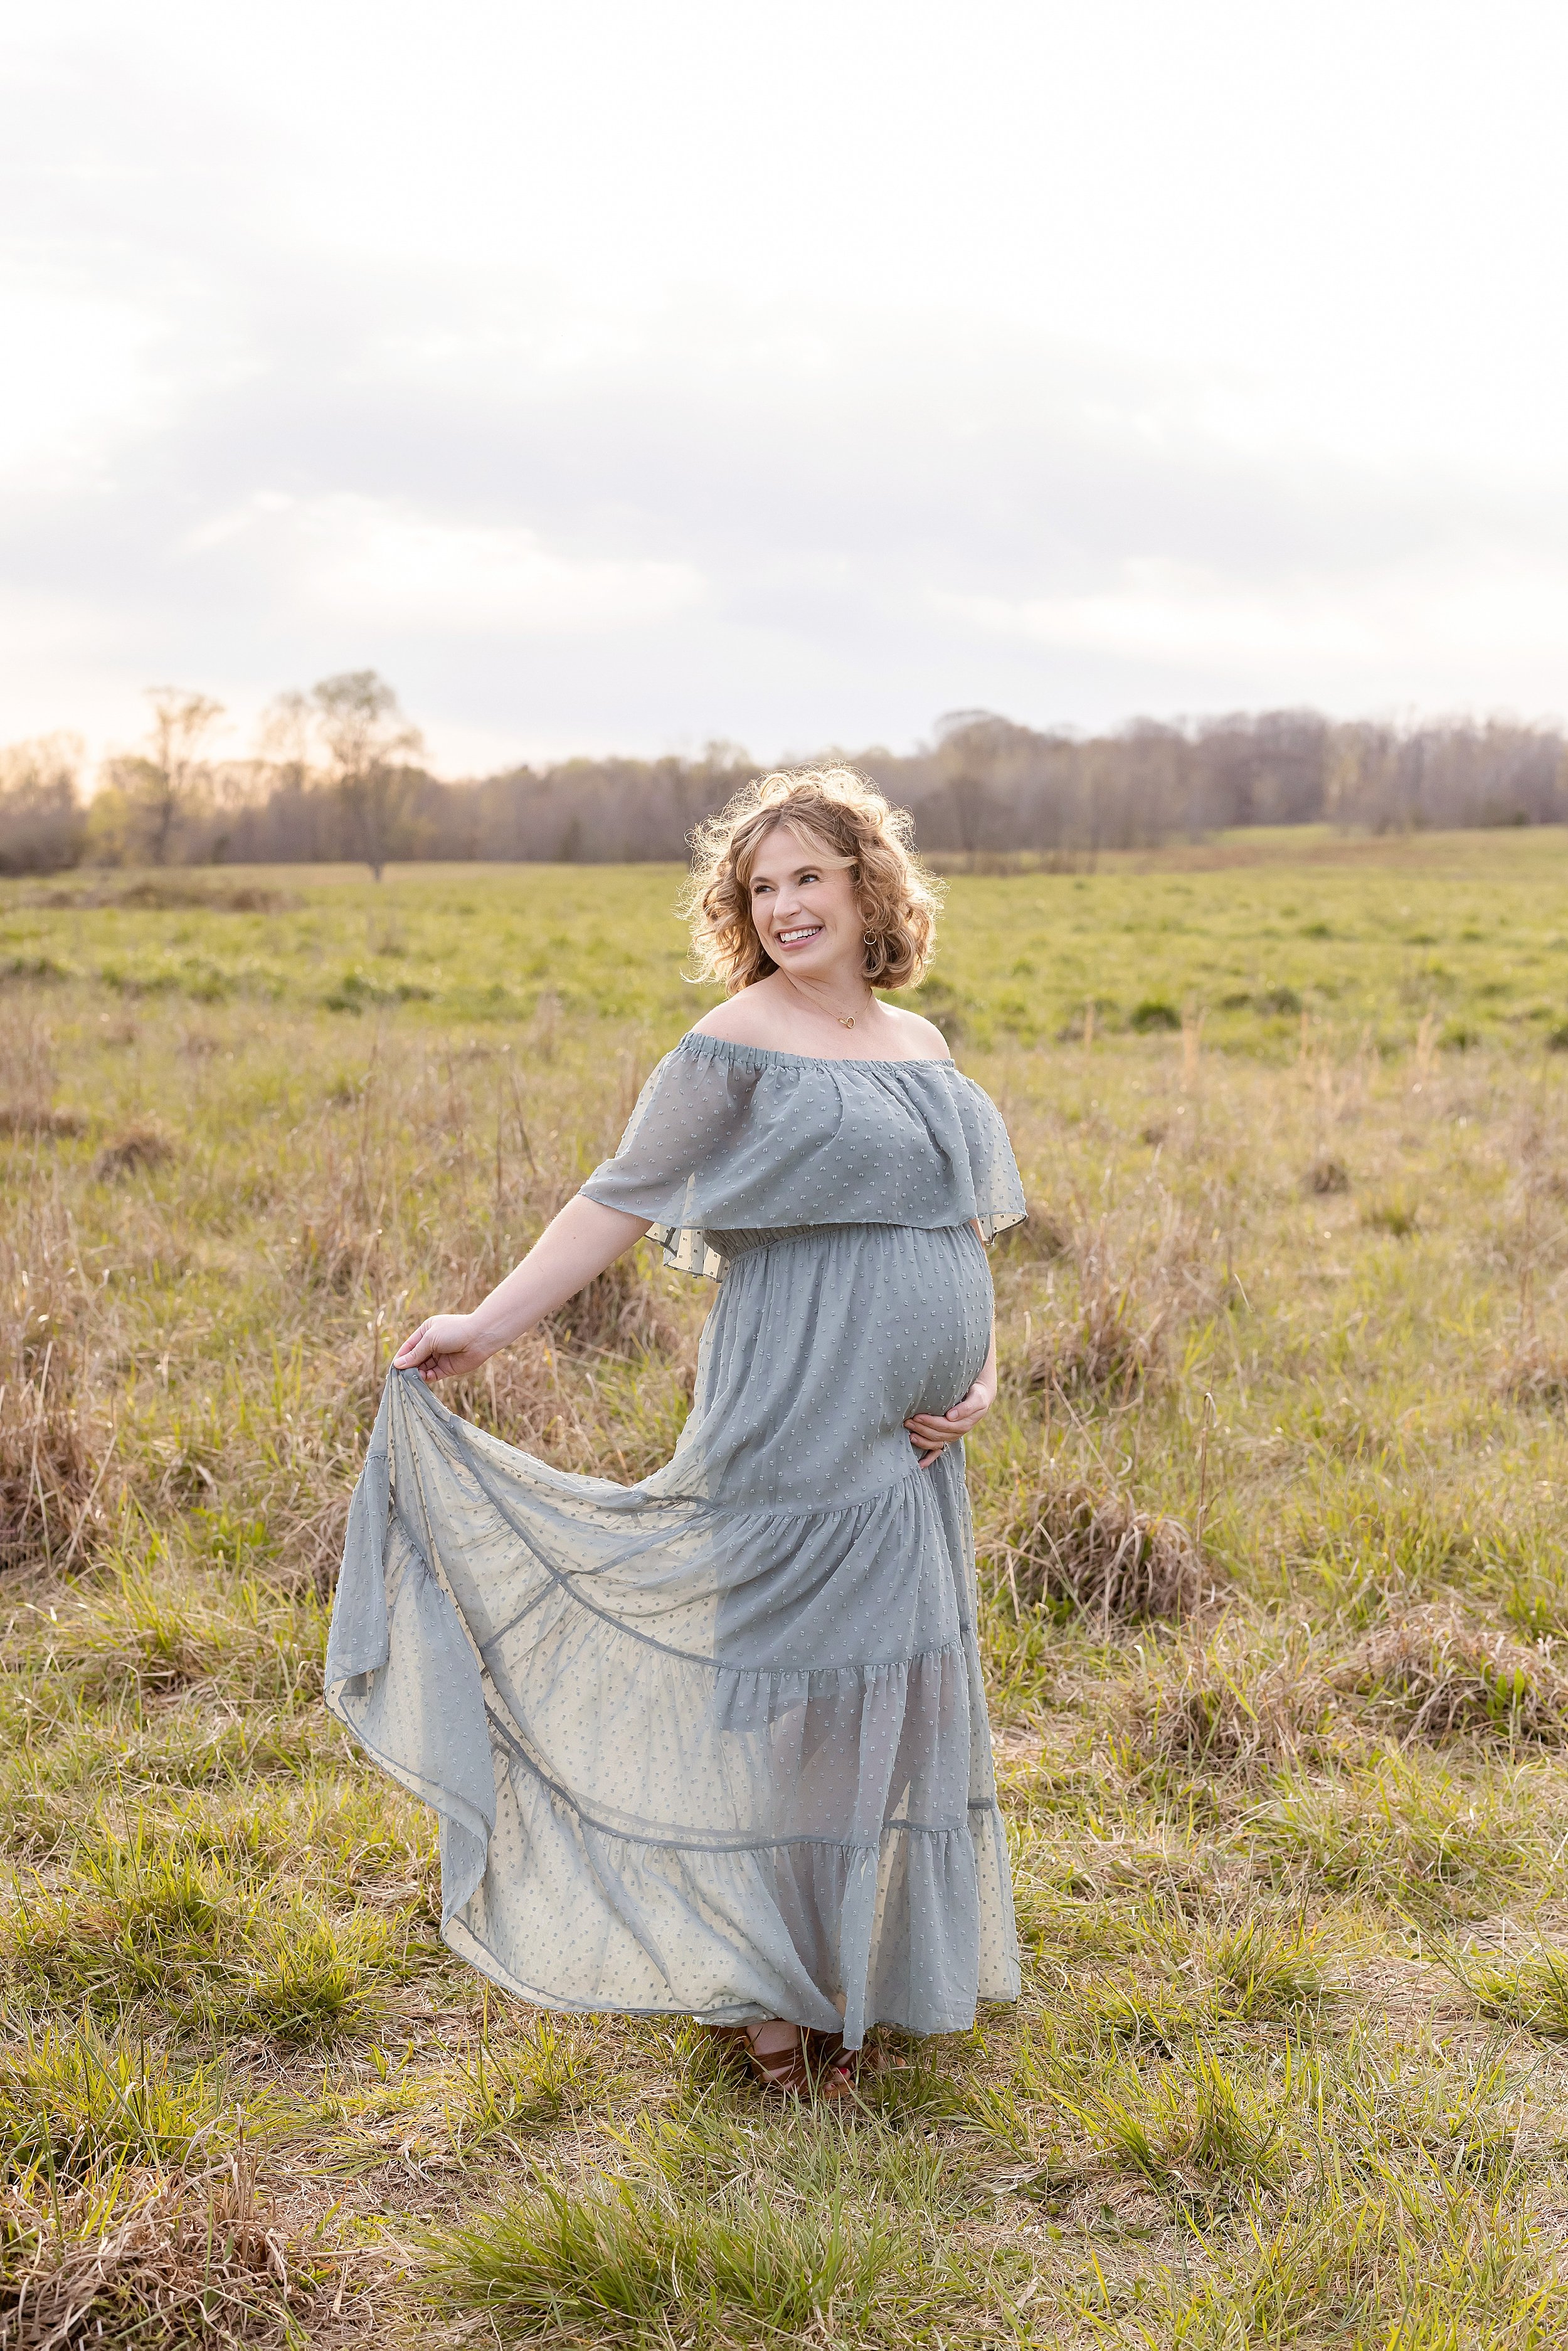  Maternity portrait of a radiant expectant mother wearing an off-the-shoulder wide-bodice flowing gown as she stands at sunset in a field during autumn holding the skirt of her gown in her right and the base of her belly with her left hand as she smi